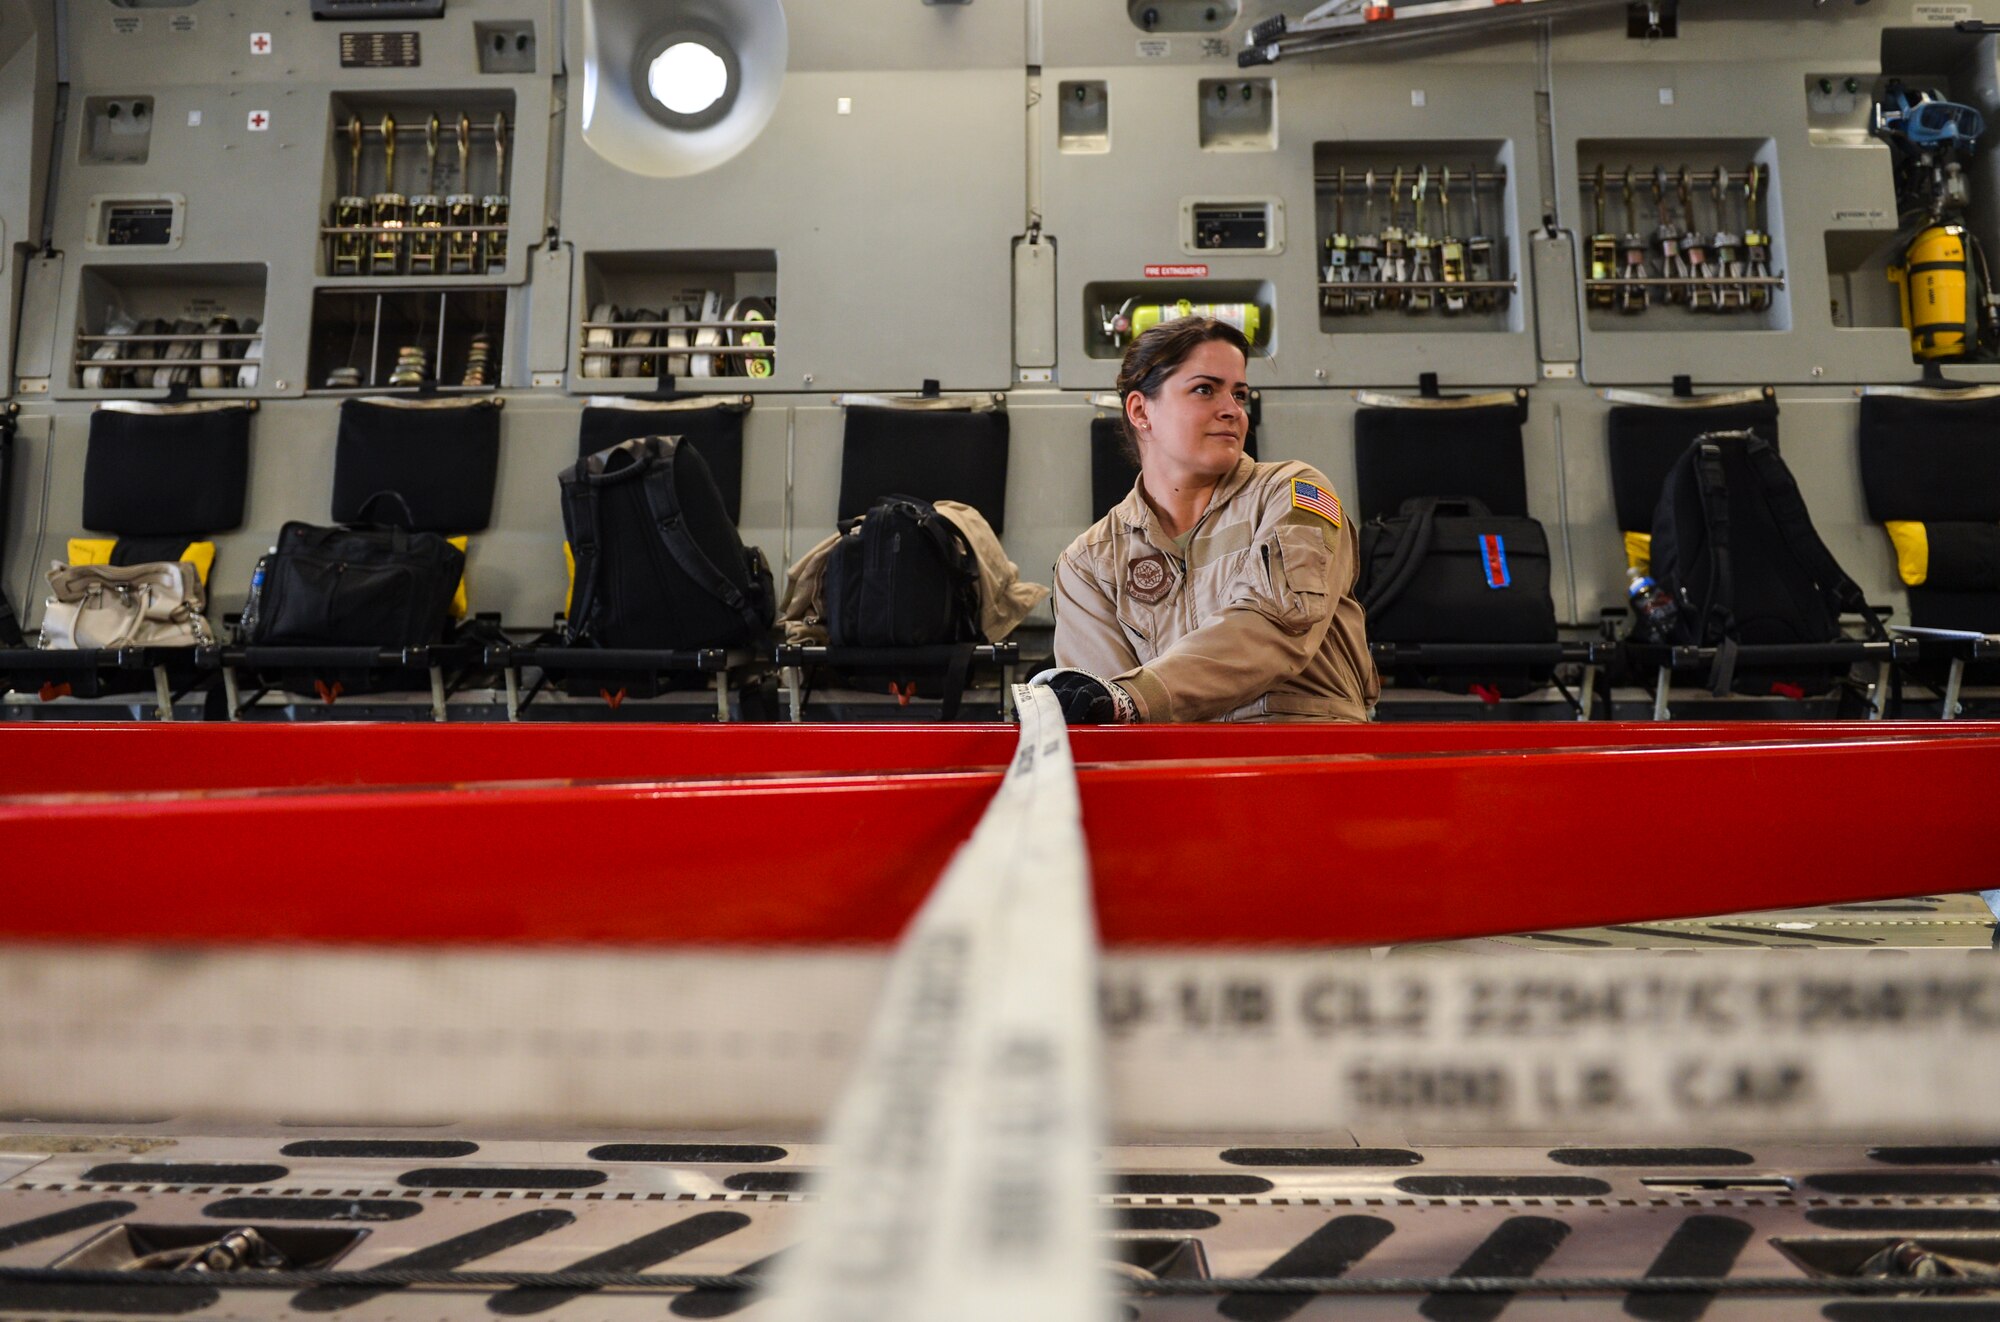 Senior Airman Desiree Lemus, 21st Airlift Squadron loadmaster and native of Homestead, Fla., ratchets cargo equipment into place inside a C-17 Globemaster III Aug. 2, 2013, at Buckley Air Force Base, Colo. The crewmembers aboard the C-17, which includes four pilots, two loadmasters and one crew chief, flew the spacecraft to its final destination at the Kennedy Space Center. (U.S. Air Force photo by Staff Sgt. Paul Labbe/Released)